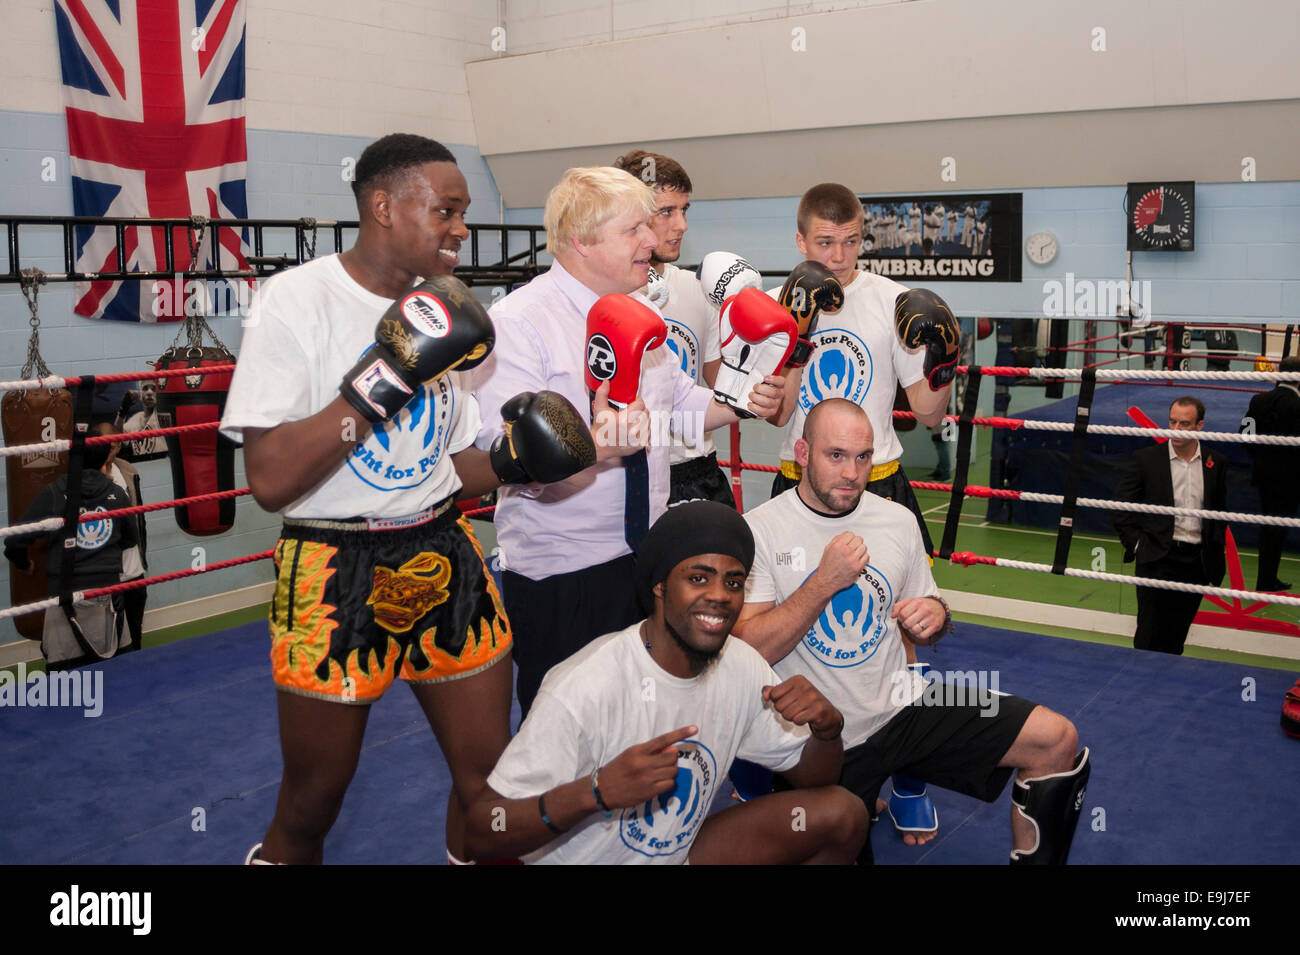 London, UK. 28th October, 2014. The Mayor of London, Boris Johnson visited a training session at Fight for Peace Academy in North Woolwich, Newham where he met some of the young people being helped by the charity. Fight for Peace uses boxing and martial arts combined with education and personal development to realise the potential of young people in the borough at risk of crime and violence.  First established in Rio in 2000 by Luke Dowdney MBE, it was replicated in Newham in 2007and is now expanding globally.  Pictured :  the Mayor in the ring.   Credit:  Stephen Chung/Alamy Live News Stock Photo